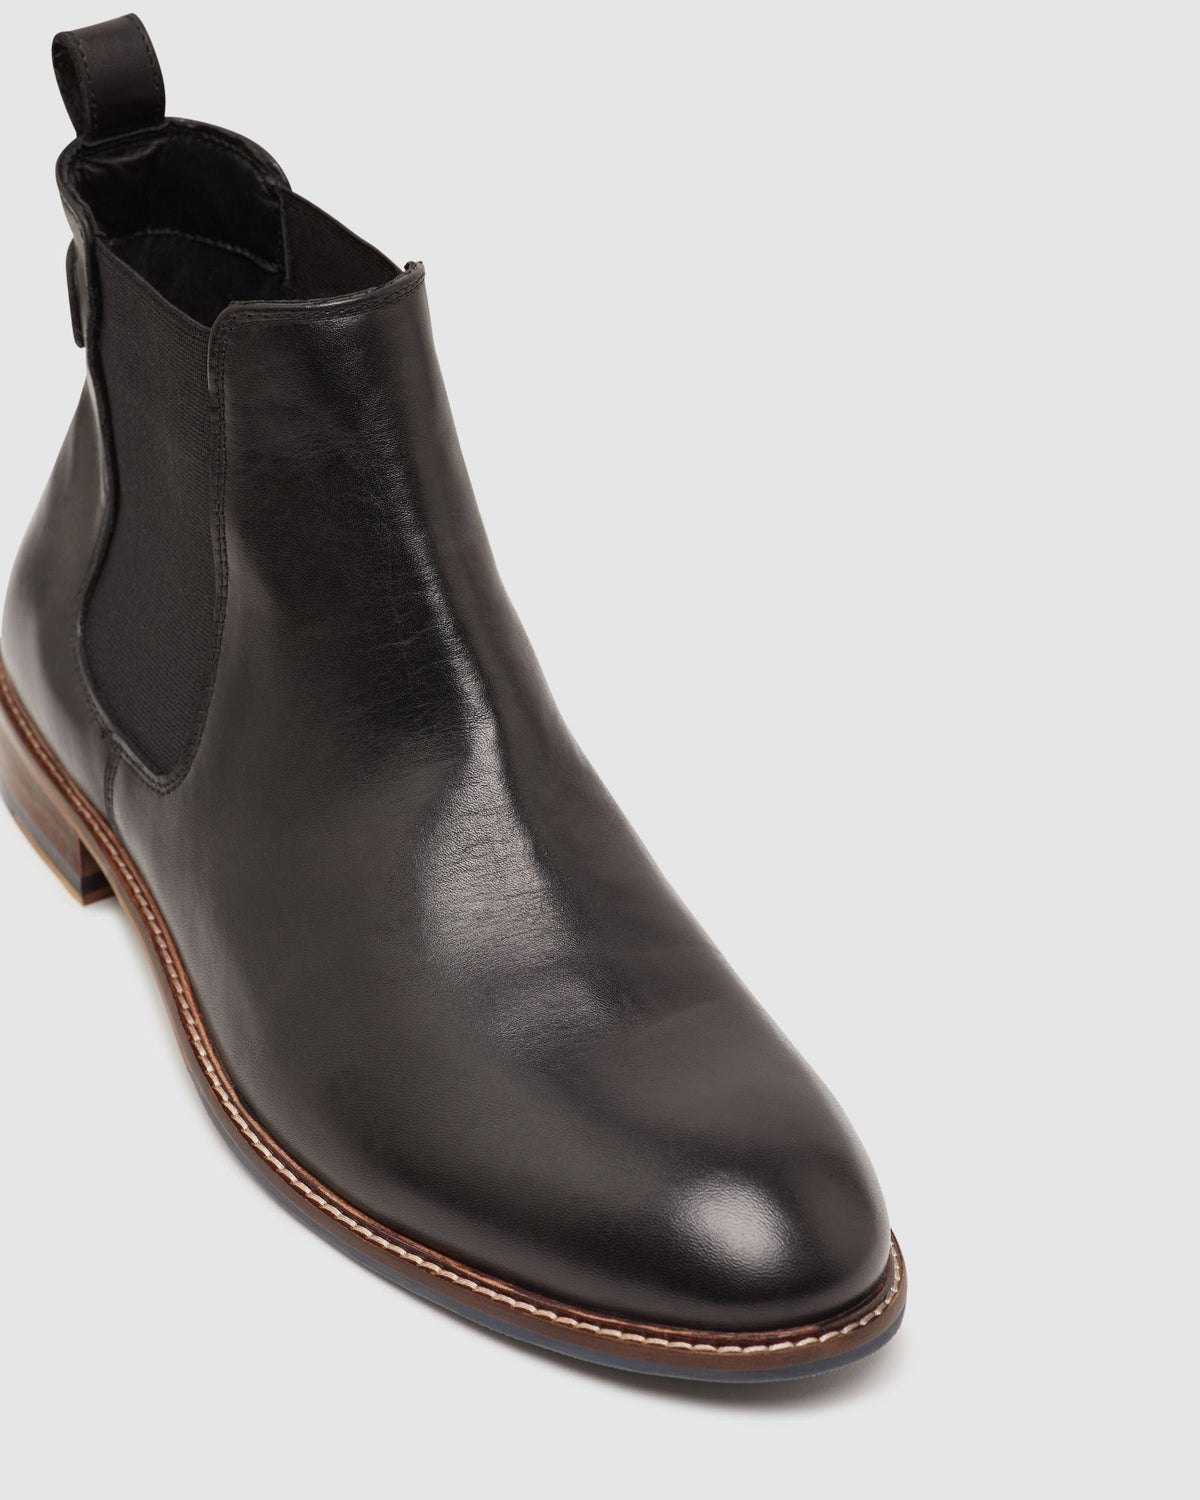 NEW SILAS CHELSEA BOOTS MENS SHOES